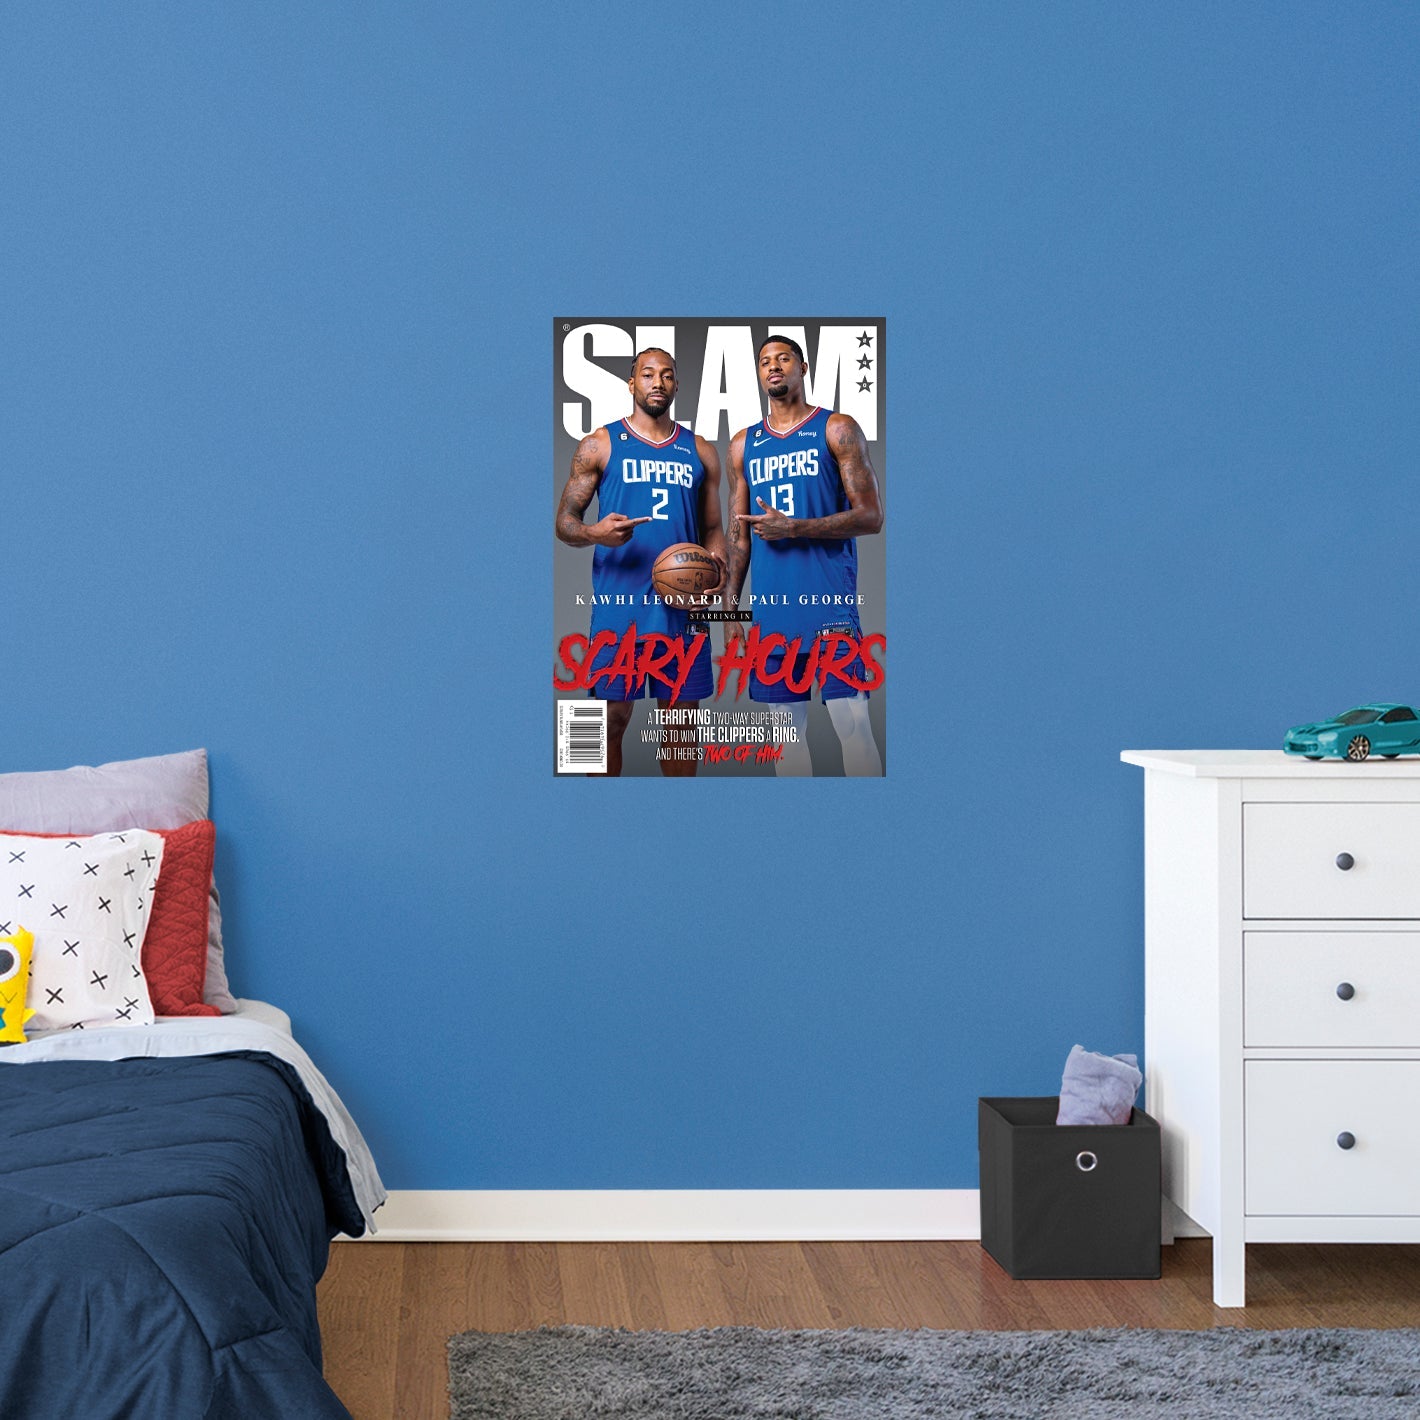 Los Angeles Clippers: Kawhi Leonard and Paul George SLAM Magazine 240 Cover Poster - Officially Licensed NBA Removable Adhesive Decal